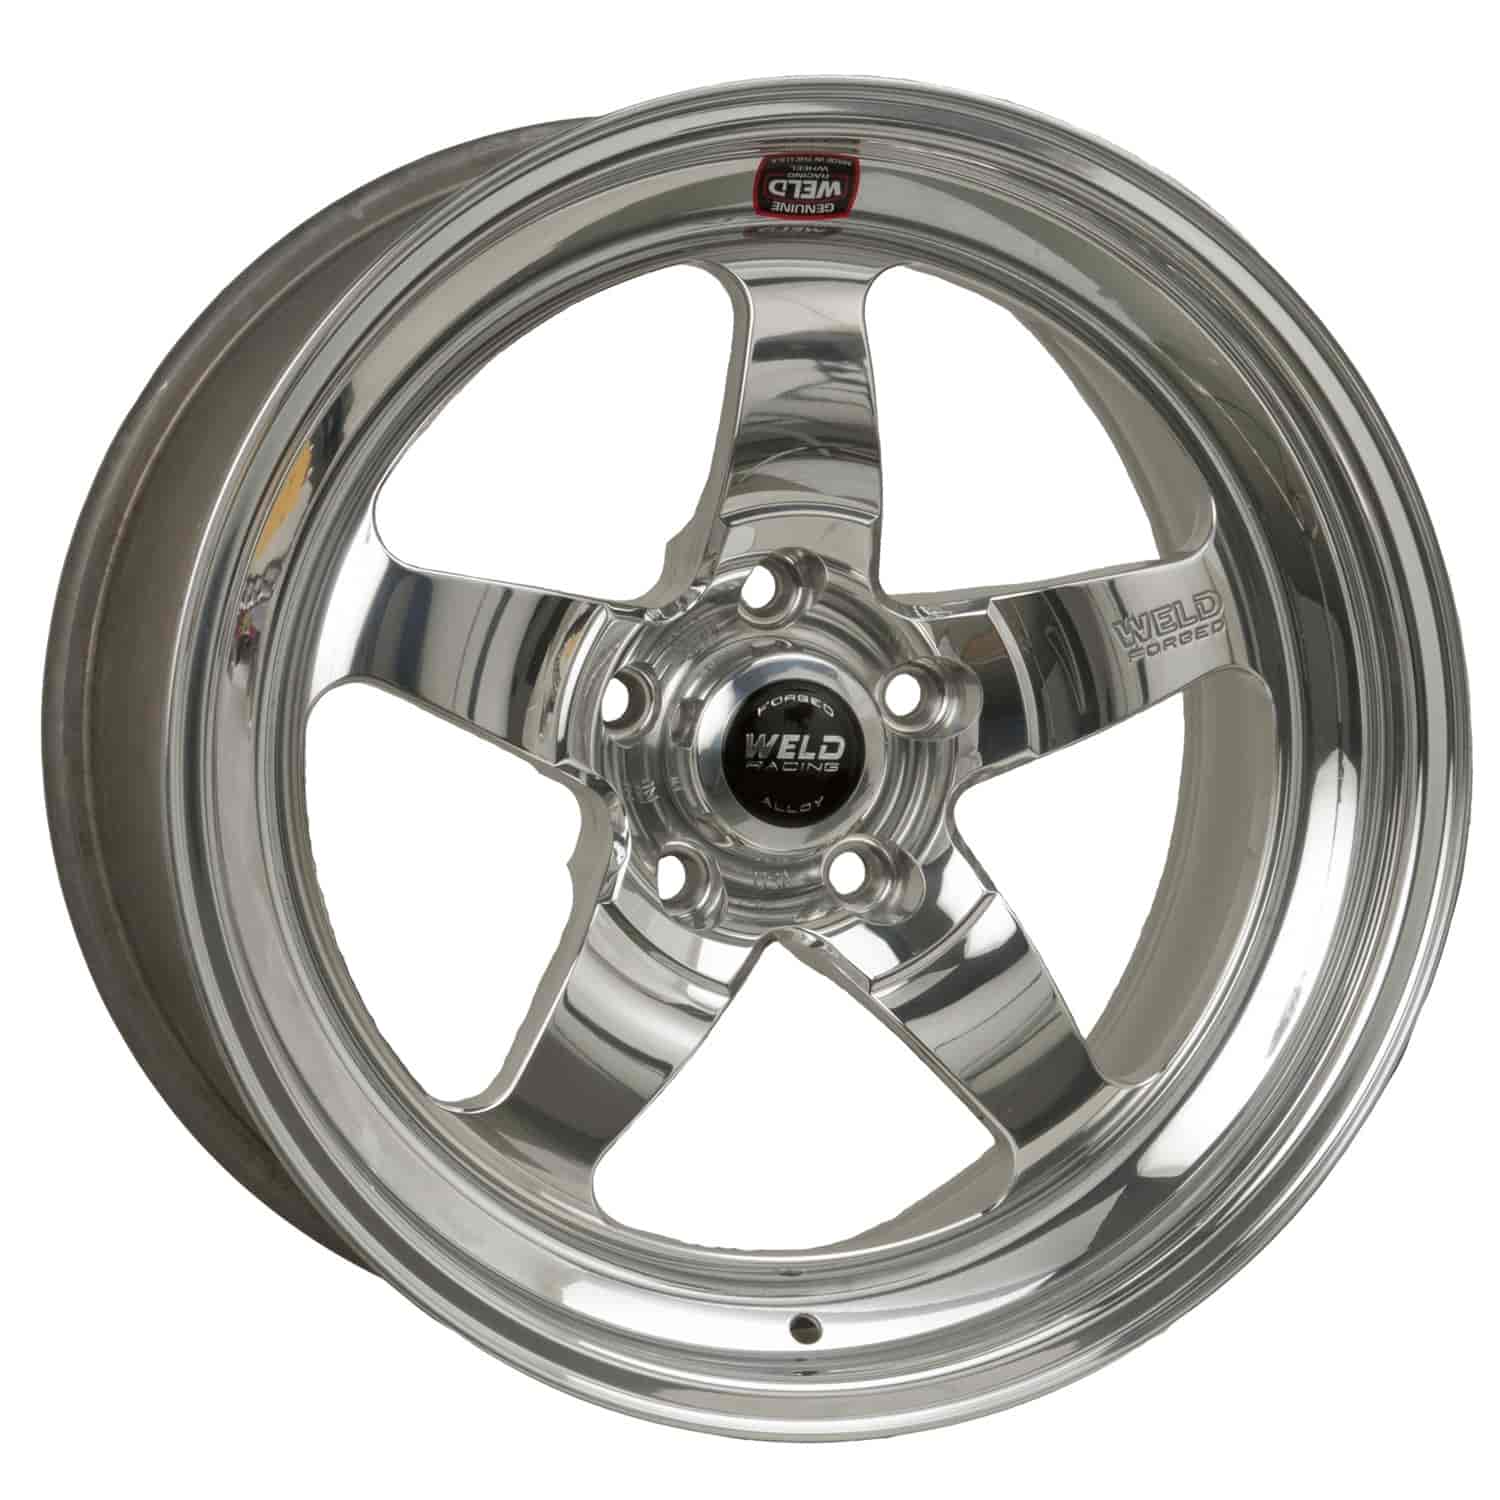 RT-S Series Wheel Size: 17" x 5" Bolt Circle: 5 x 4.5" Rear Spacing: 2.20" Polished